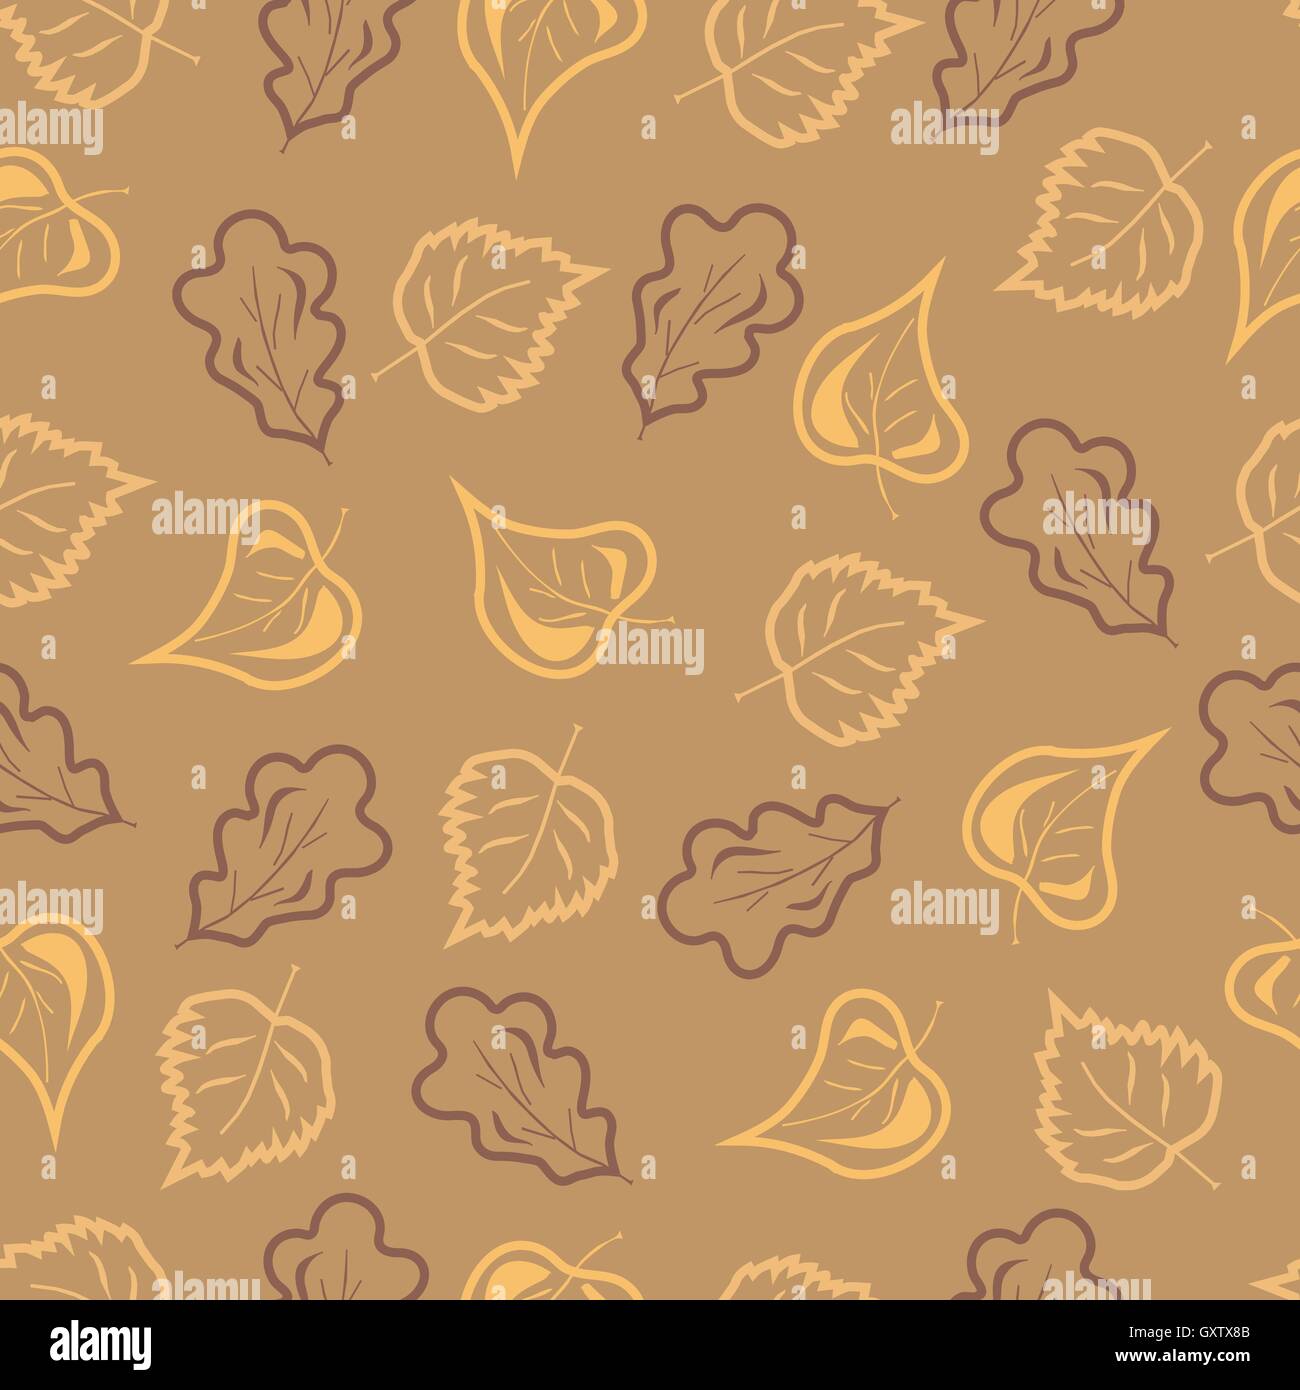 Fall colored oak birch and  linden leaves seamless pattern Stock Vector